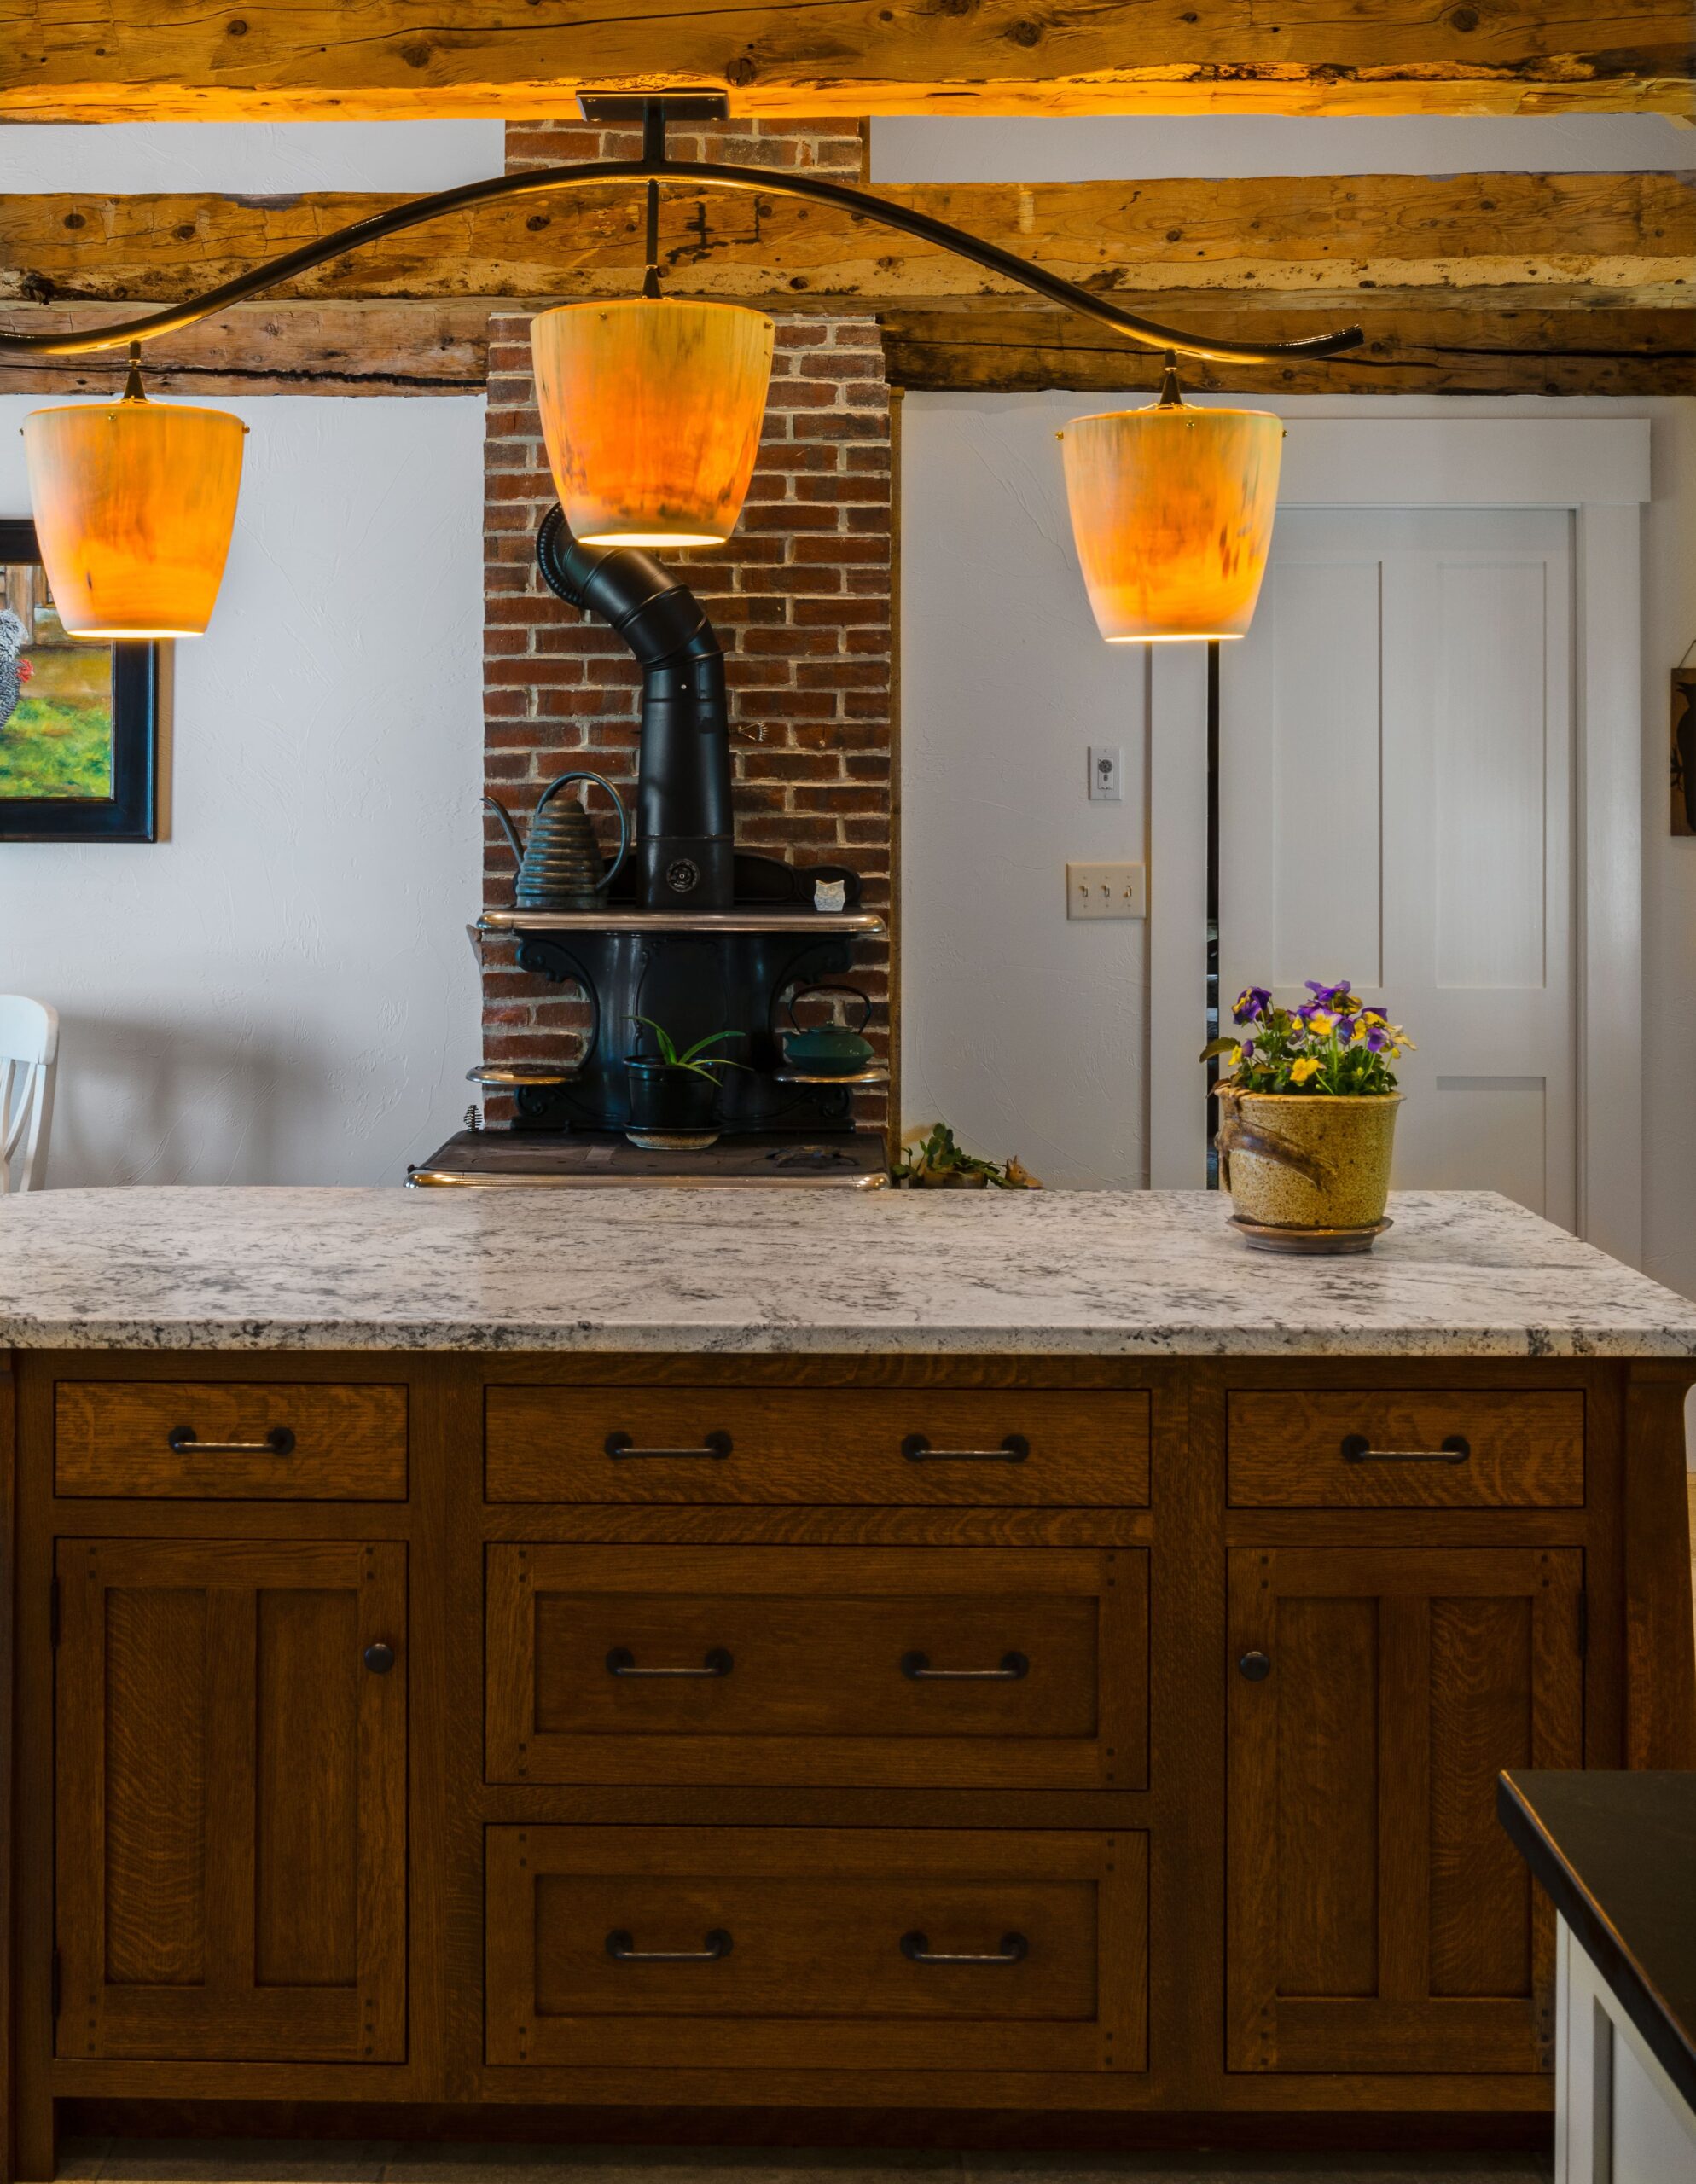 Large light fixture above wooden kitchen island with granite countertops